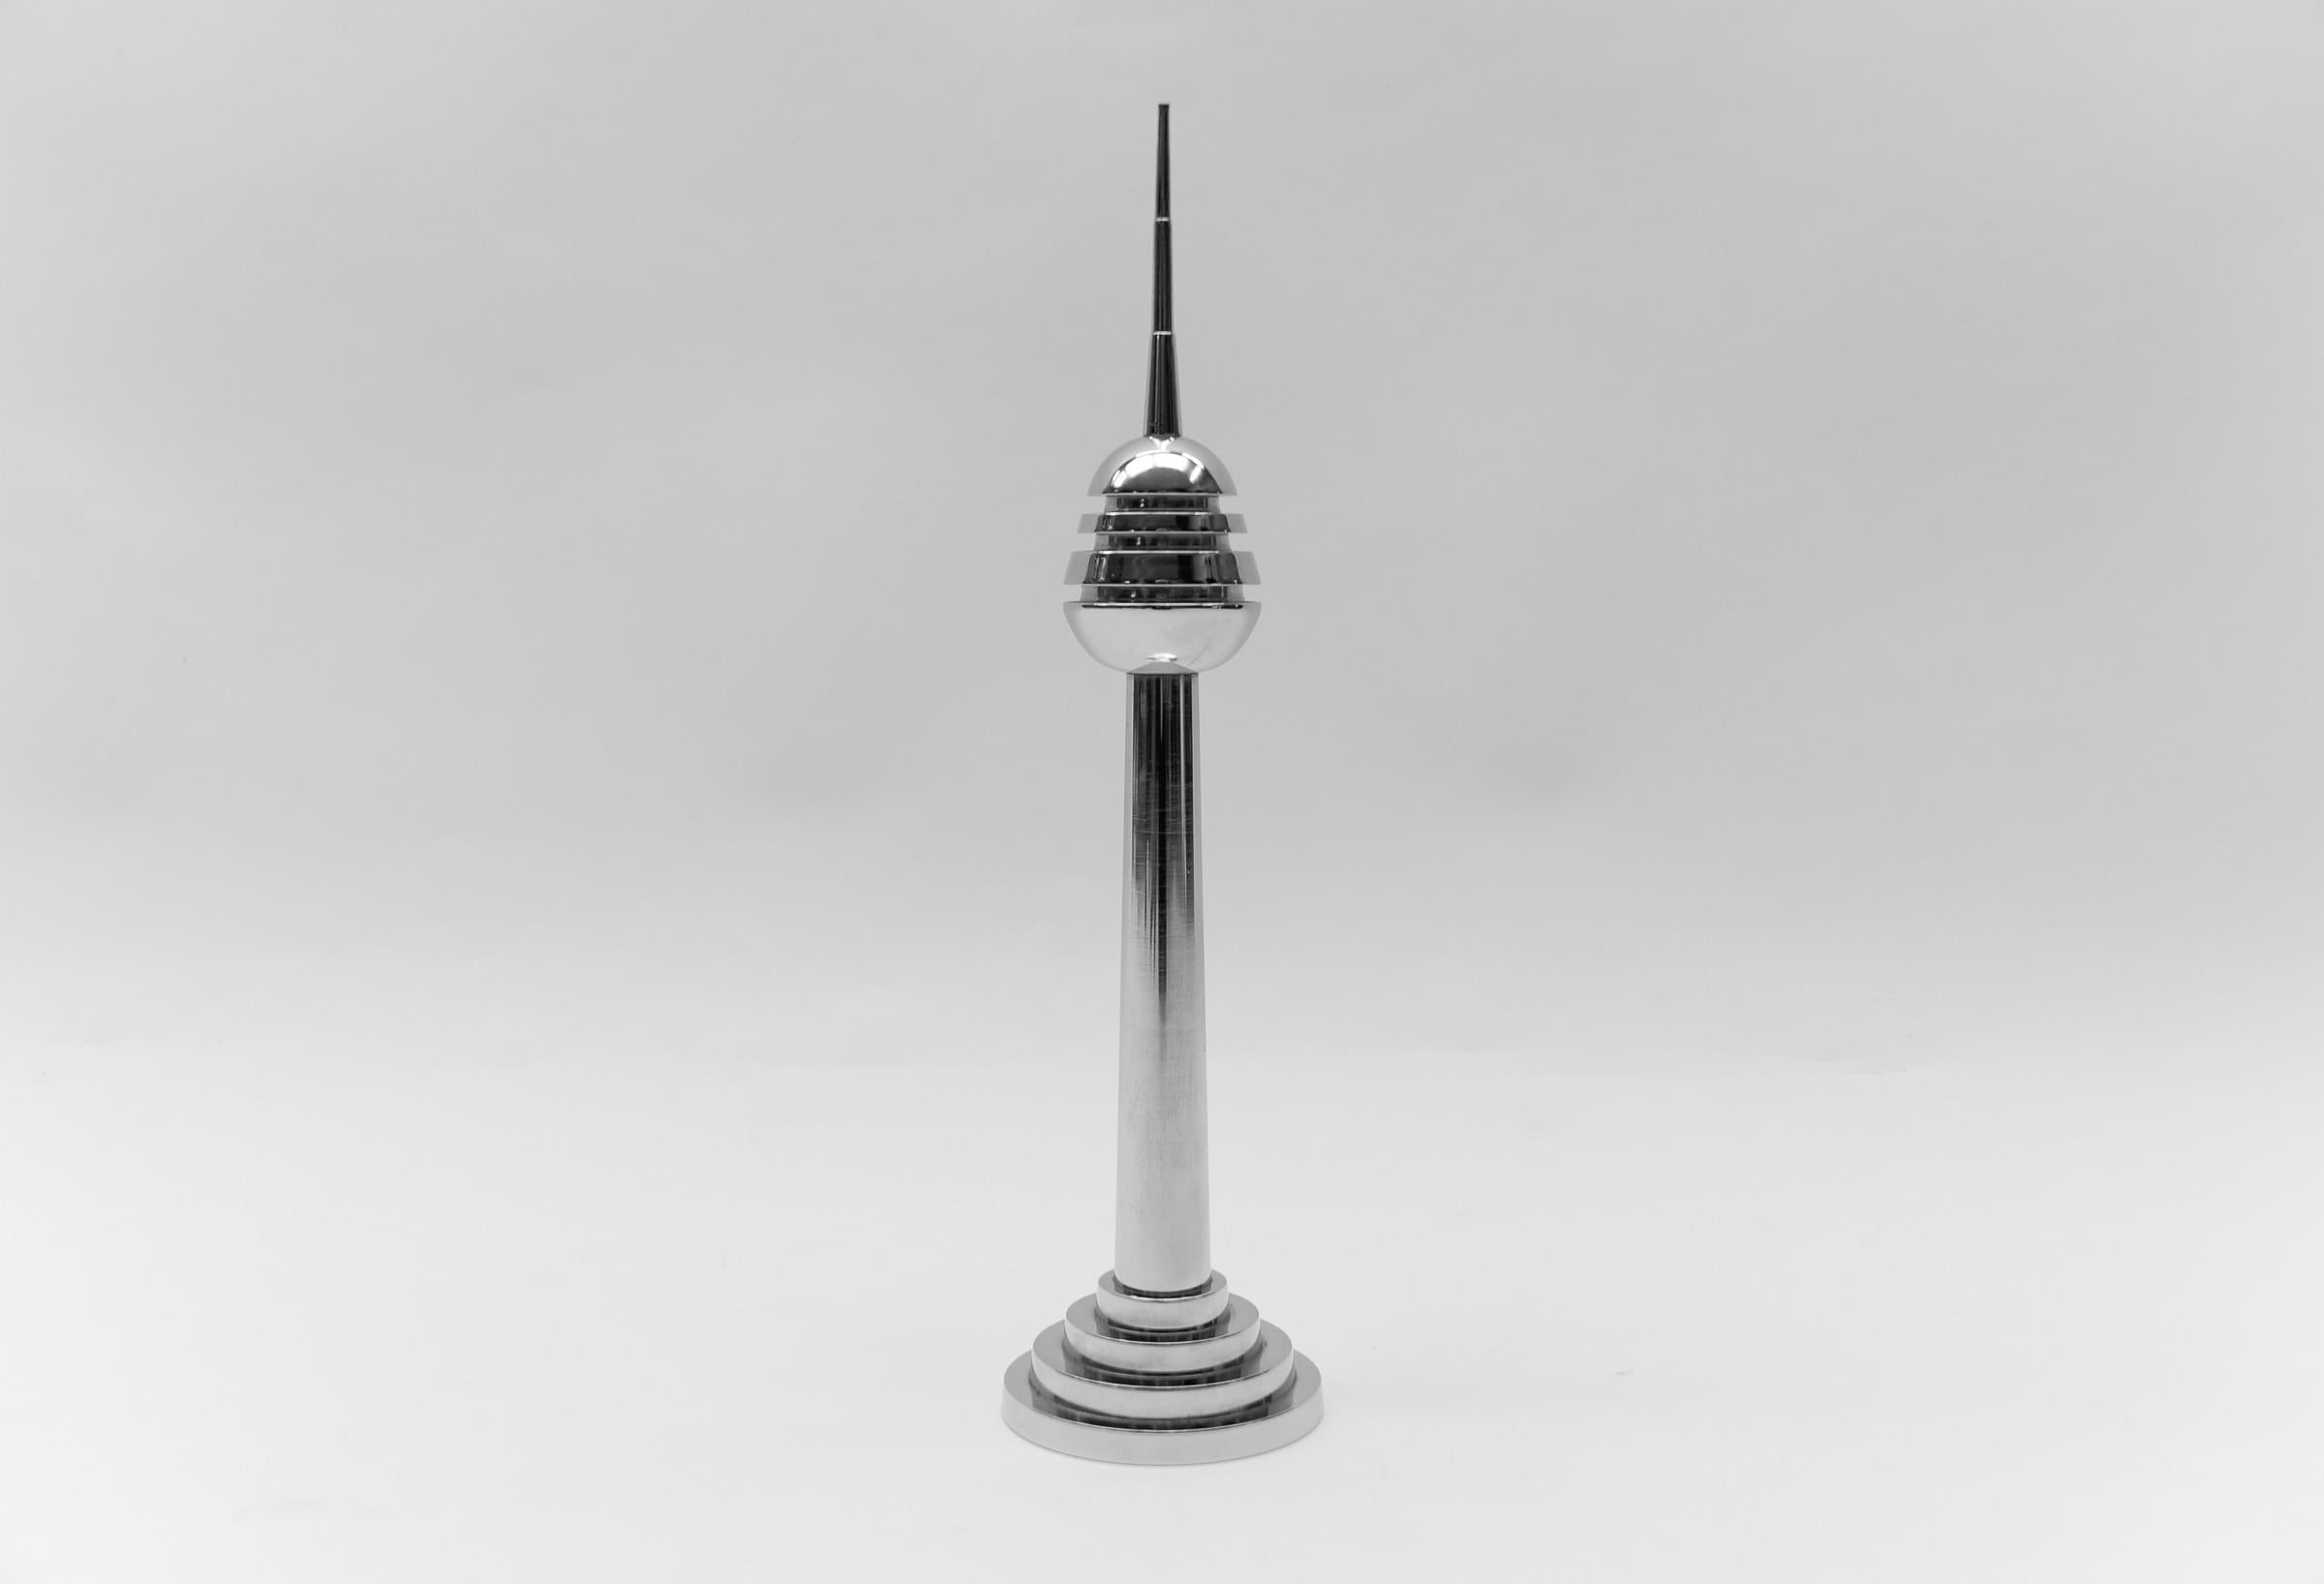 Metal Large and Heavy Mid-Century Modern Tv-Tower Sculpture, 1970s